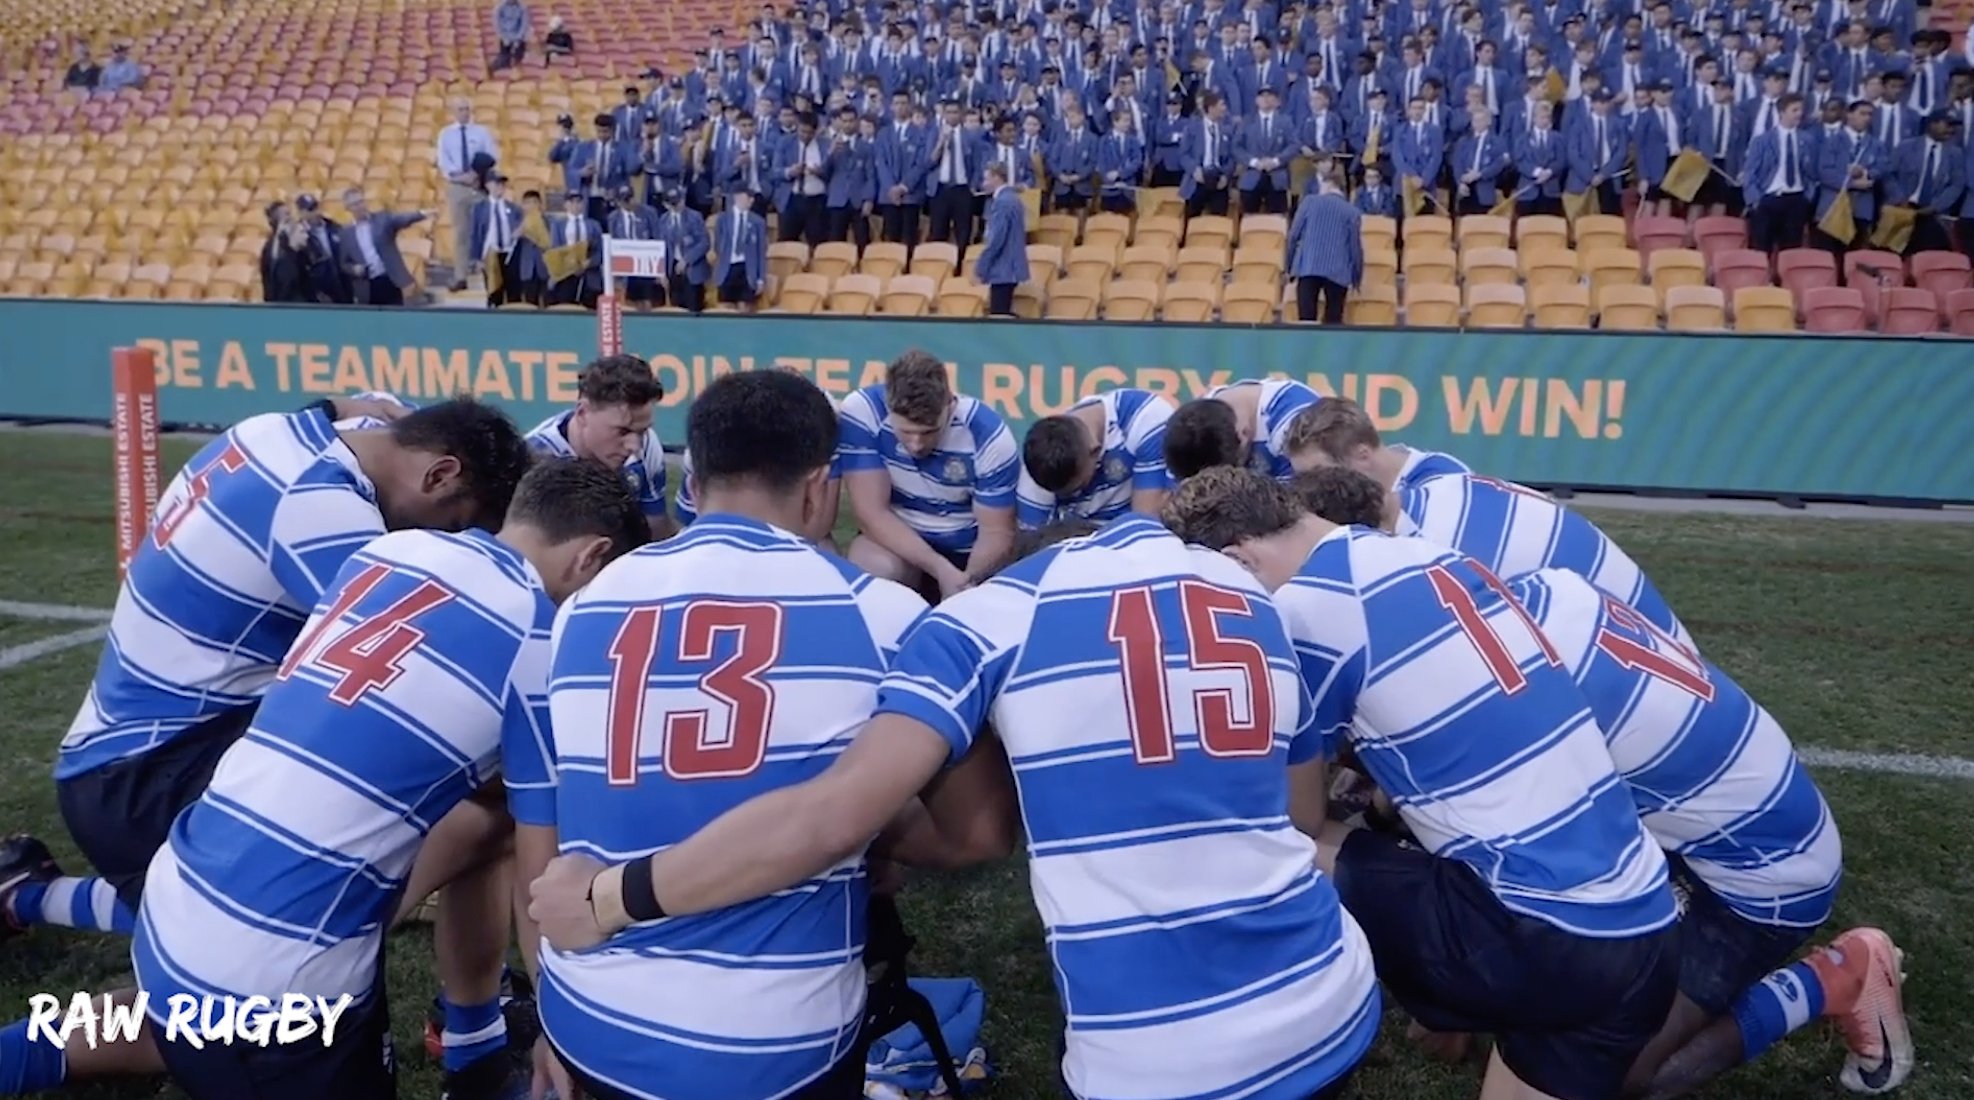 WATCH: The incredible standard of rugby played at St Joseph's Nudgee College in Australia